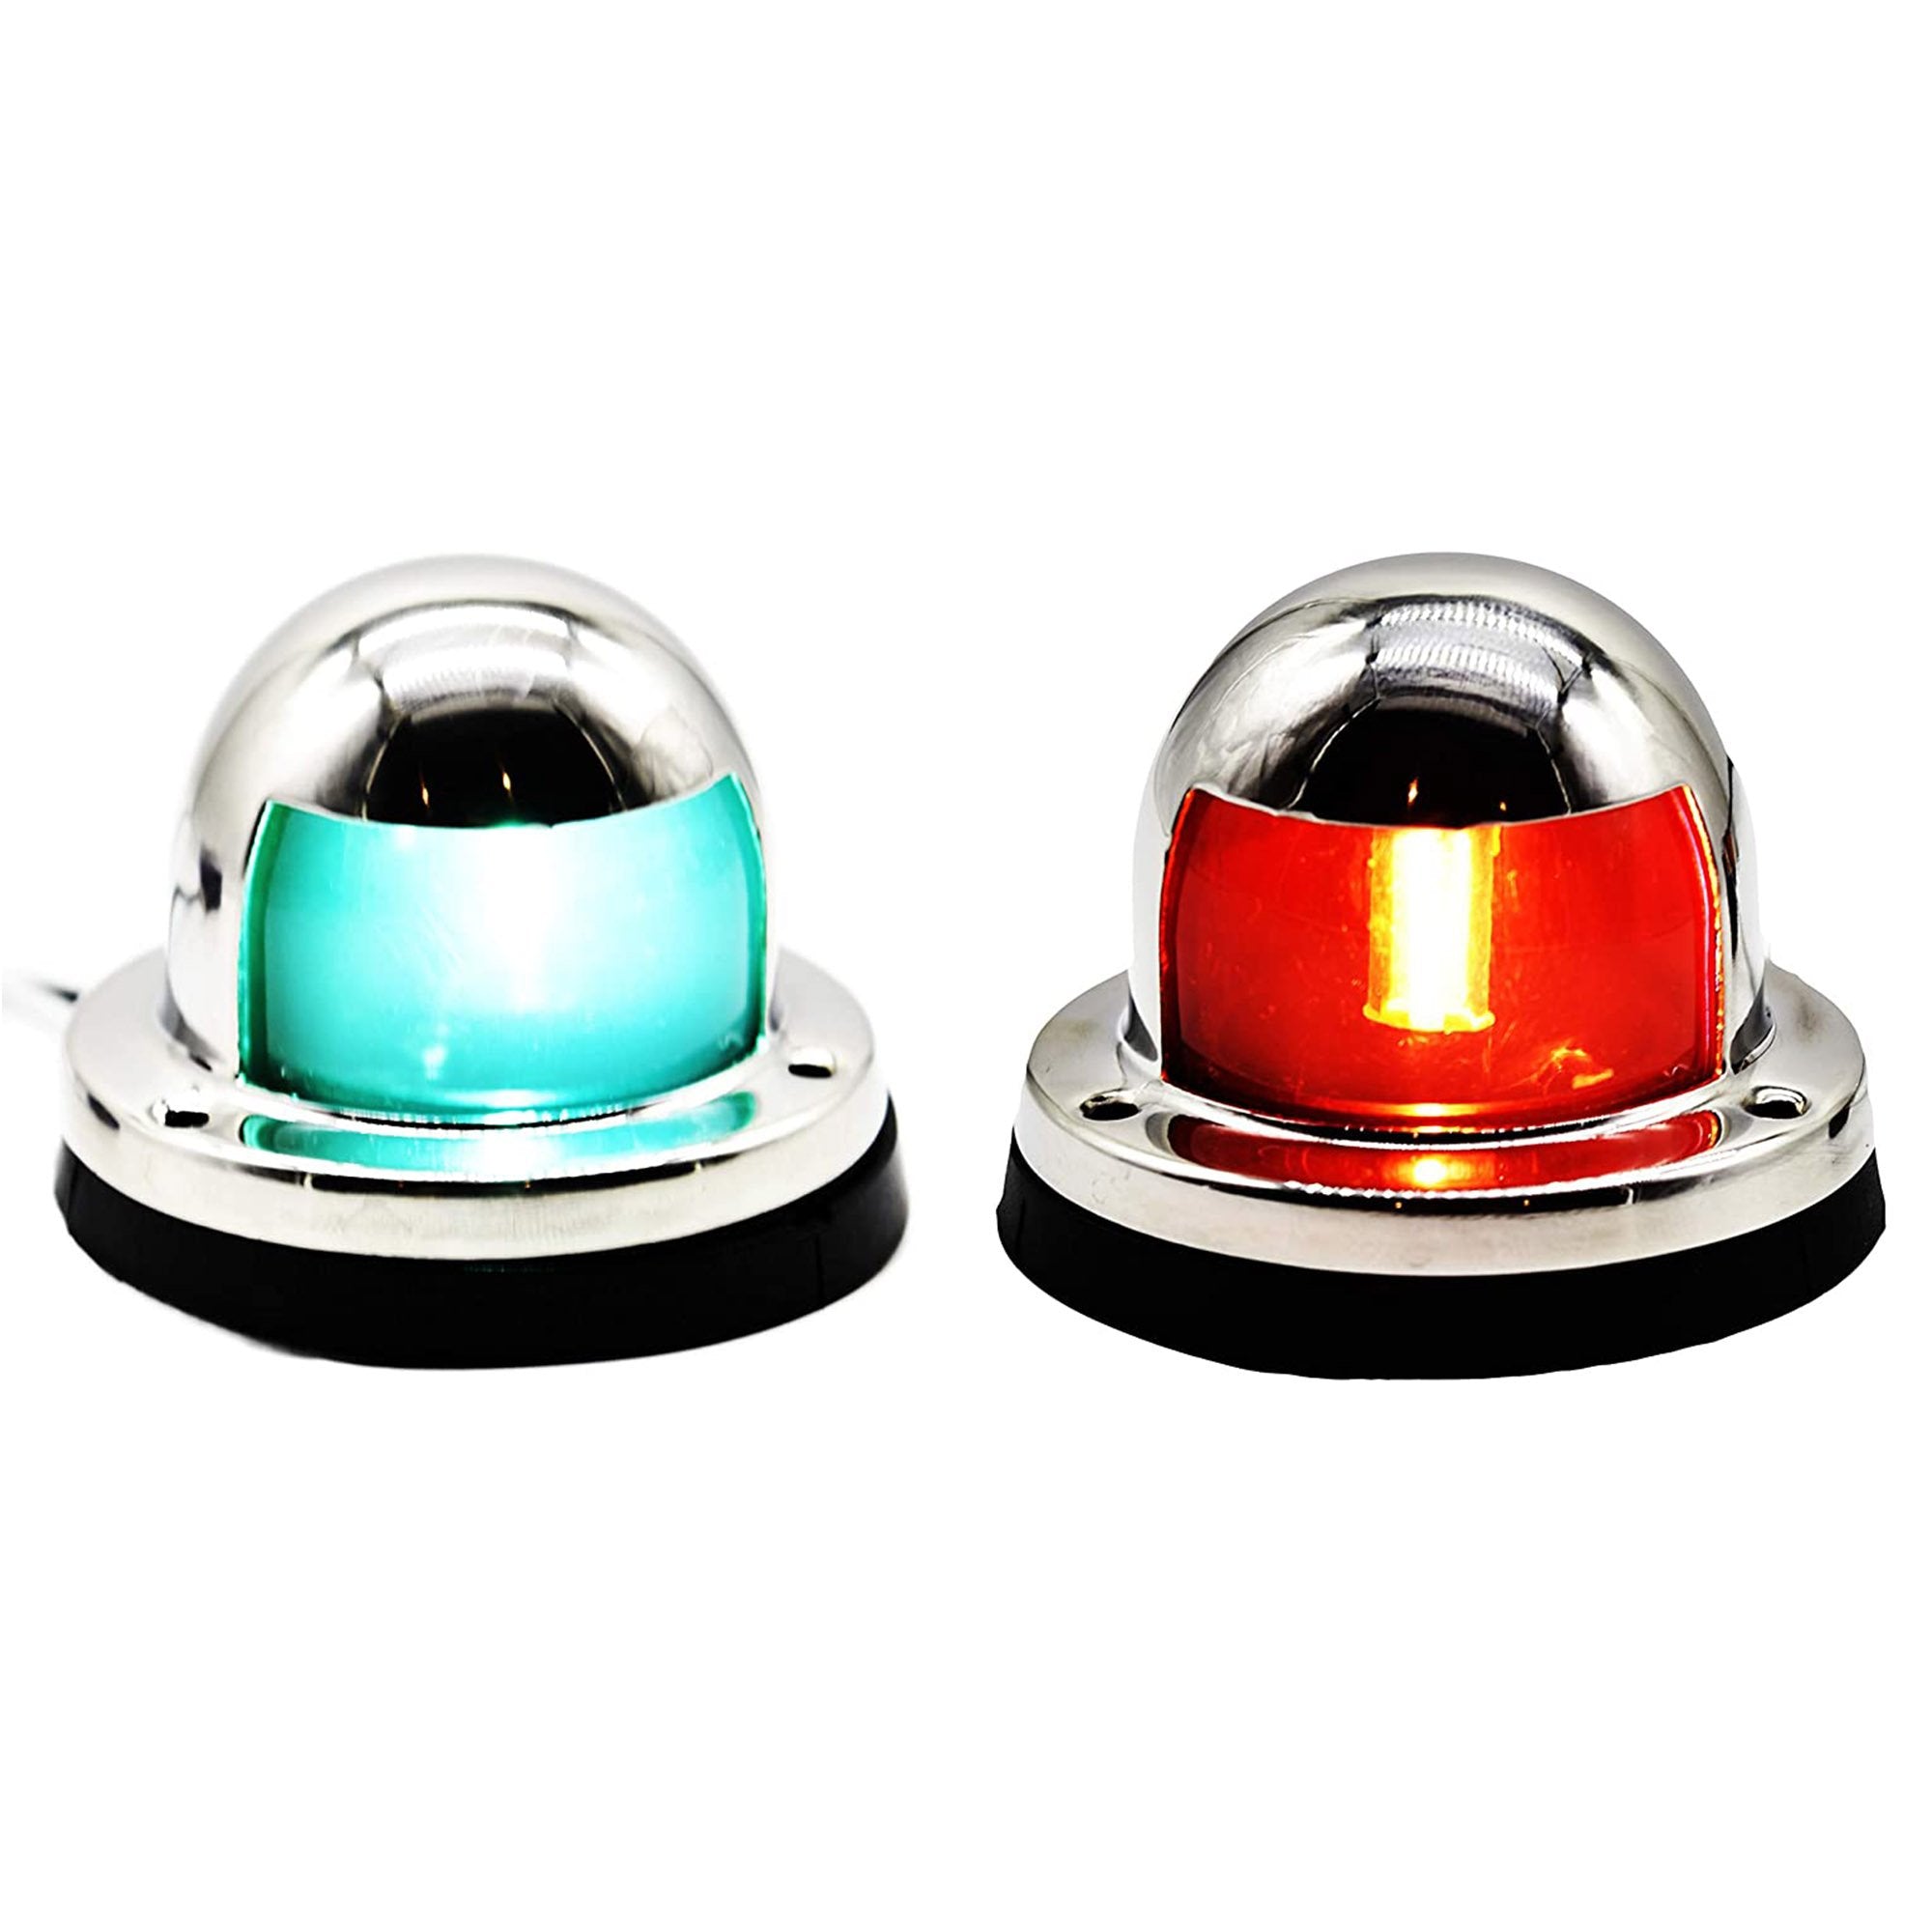 Marine City Stainless Steel Red and Green Side Bow Lights for Boats 1 Mile (a Pair)